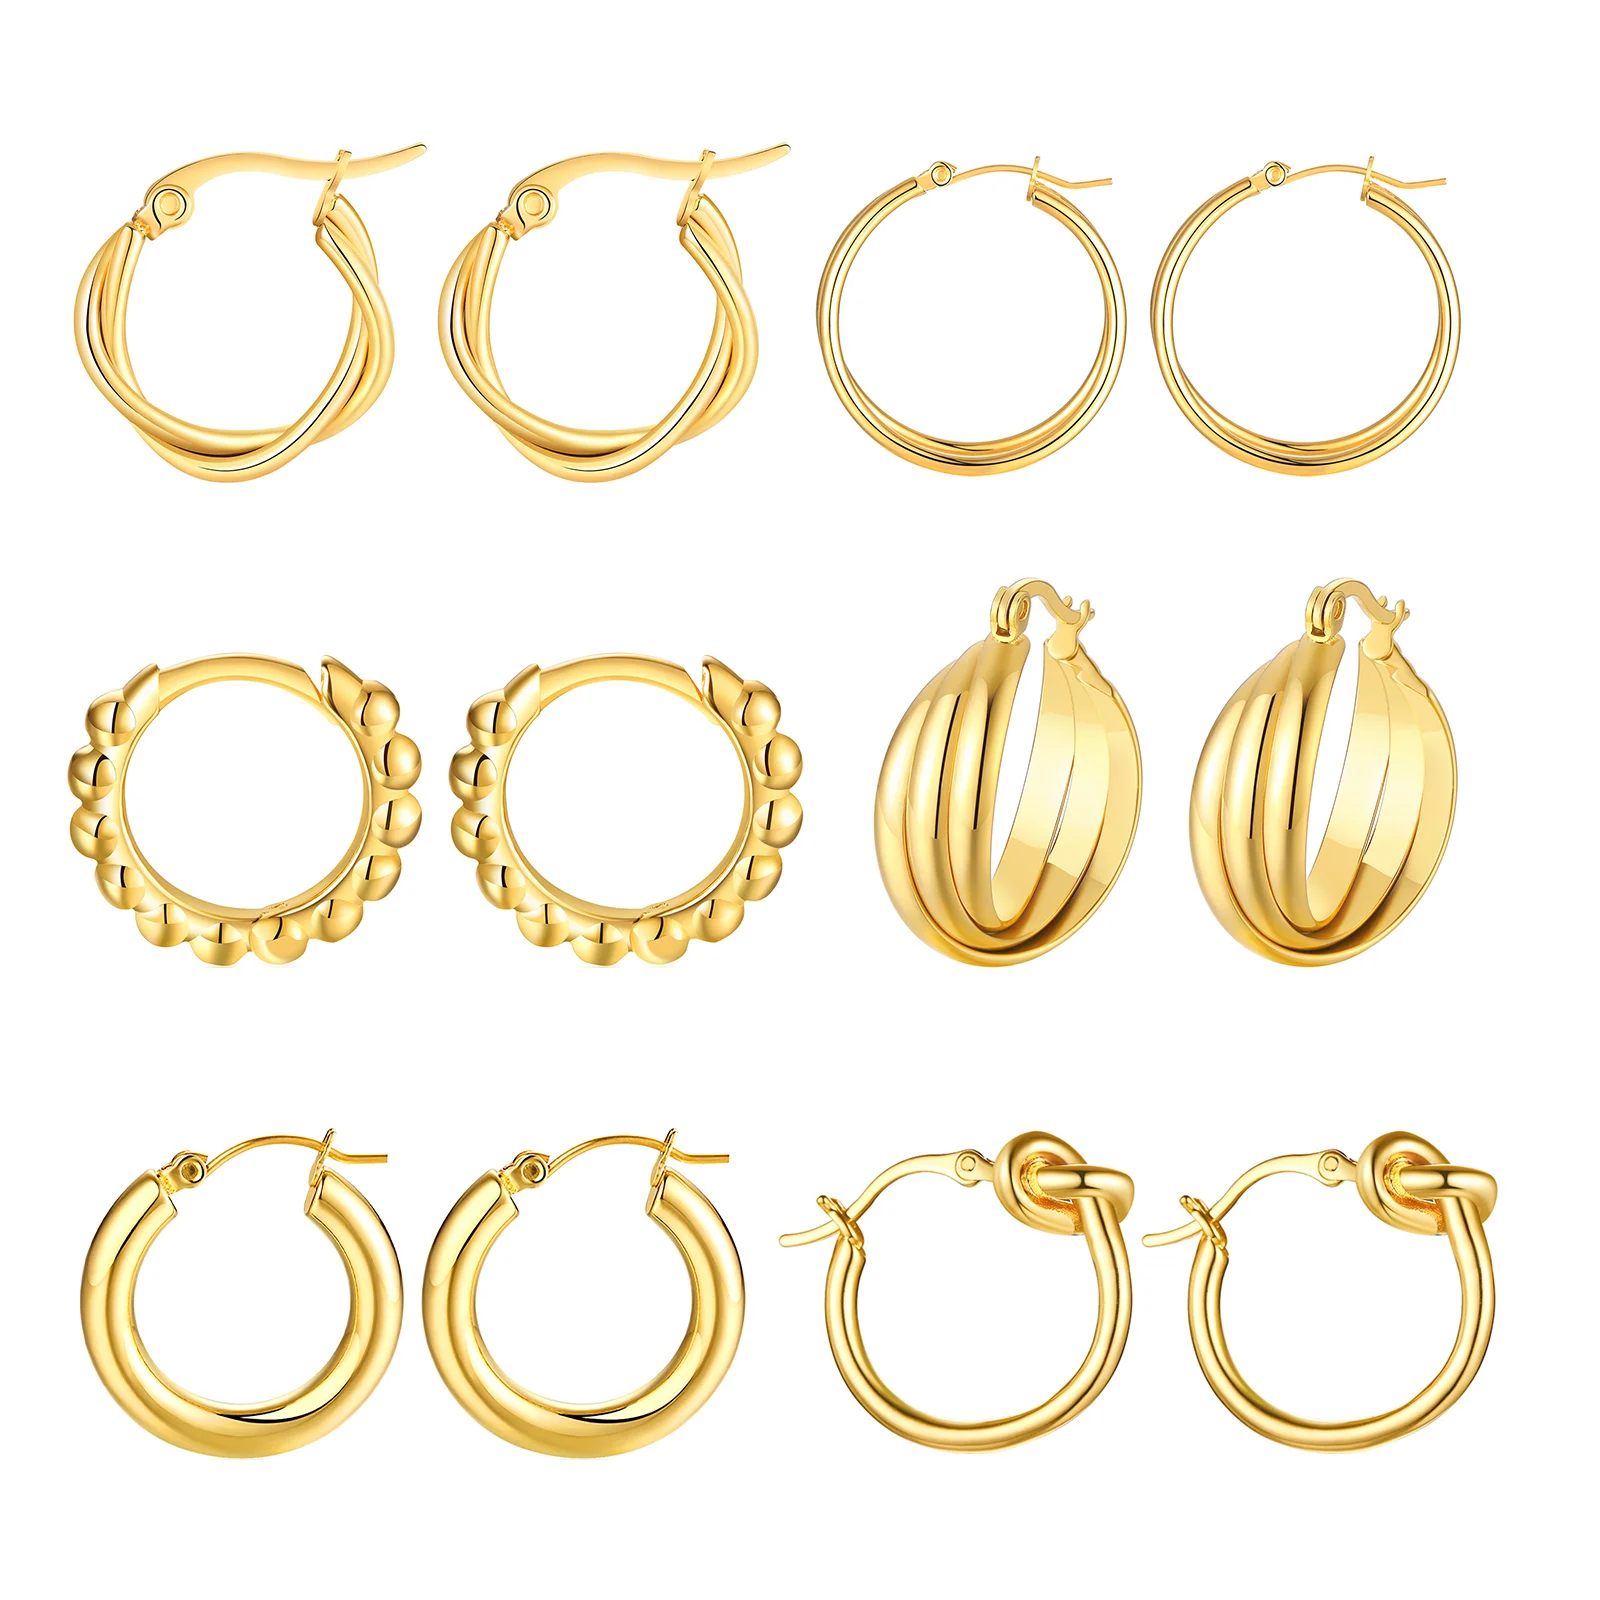 Small Knoted Hoop Earrings for Women Girls Charm Stainless Steel Gold Color Dainty Circle Ears Jewelry images - 6